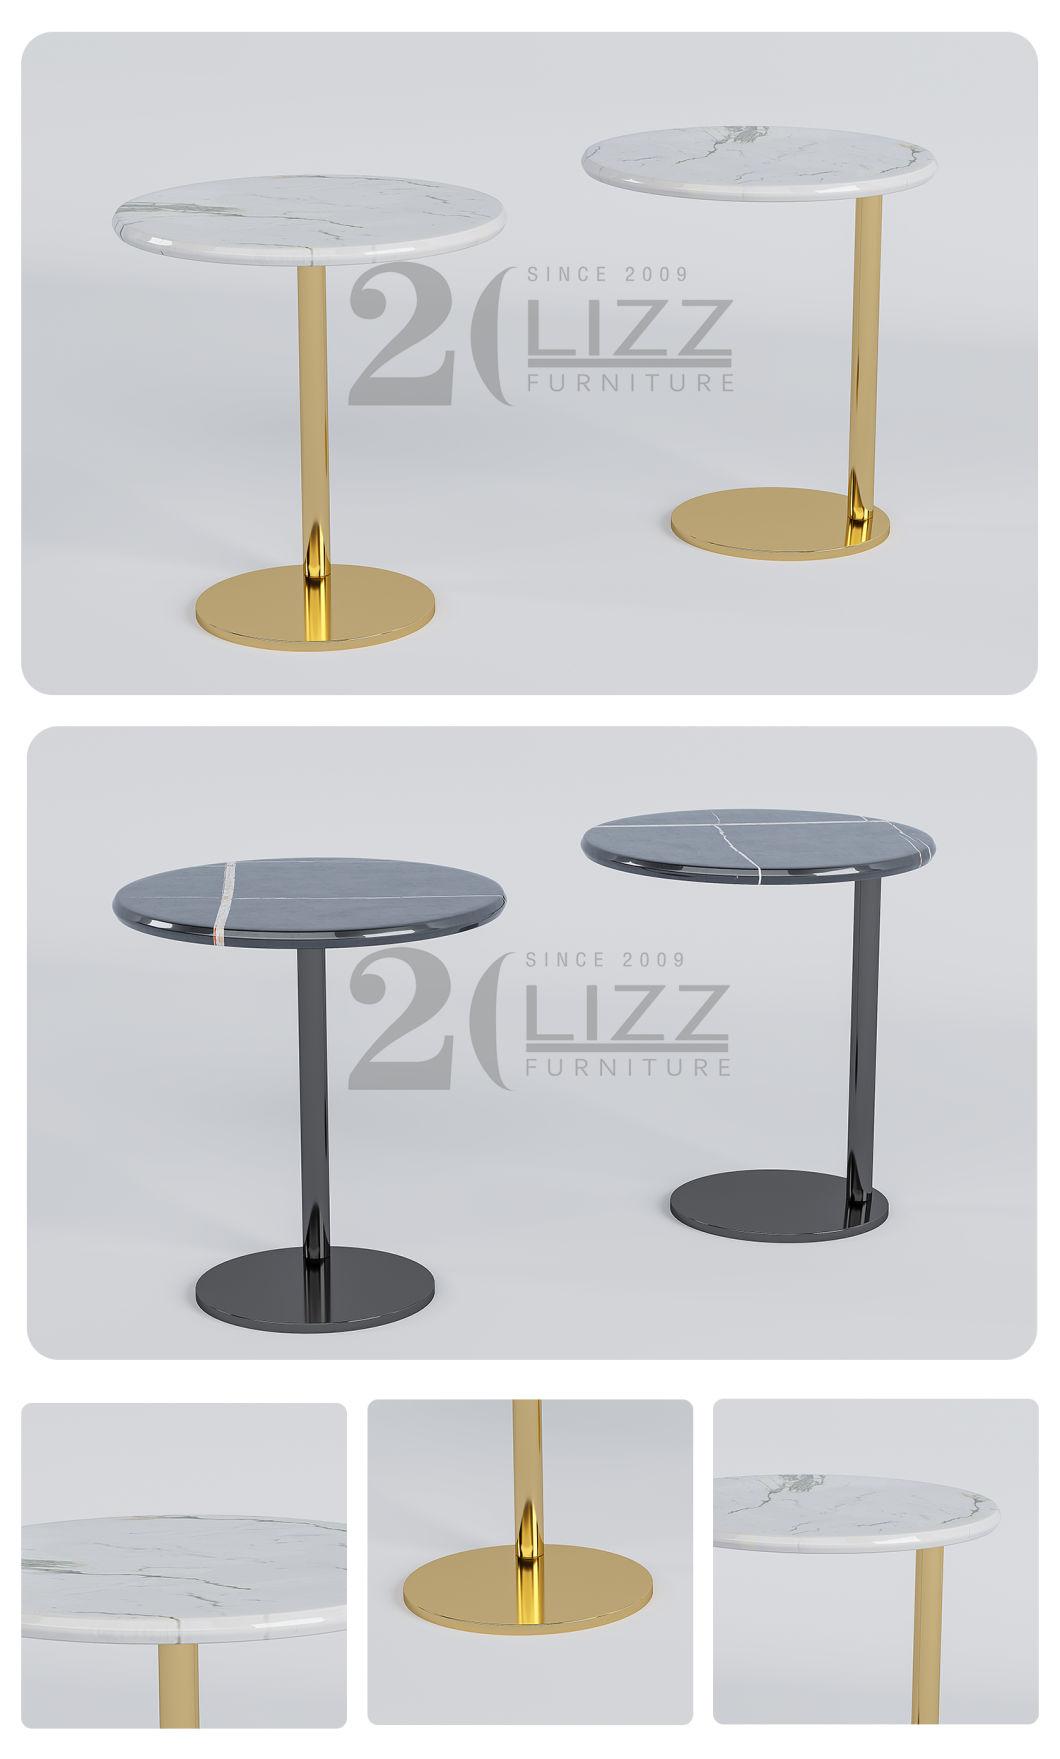 Luxury Marble Top Coffee Table with Metal Leg Modern Home Living Room Furniture